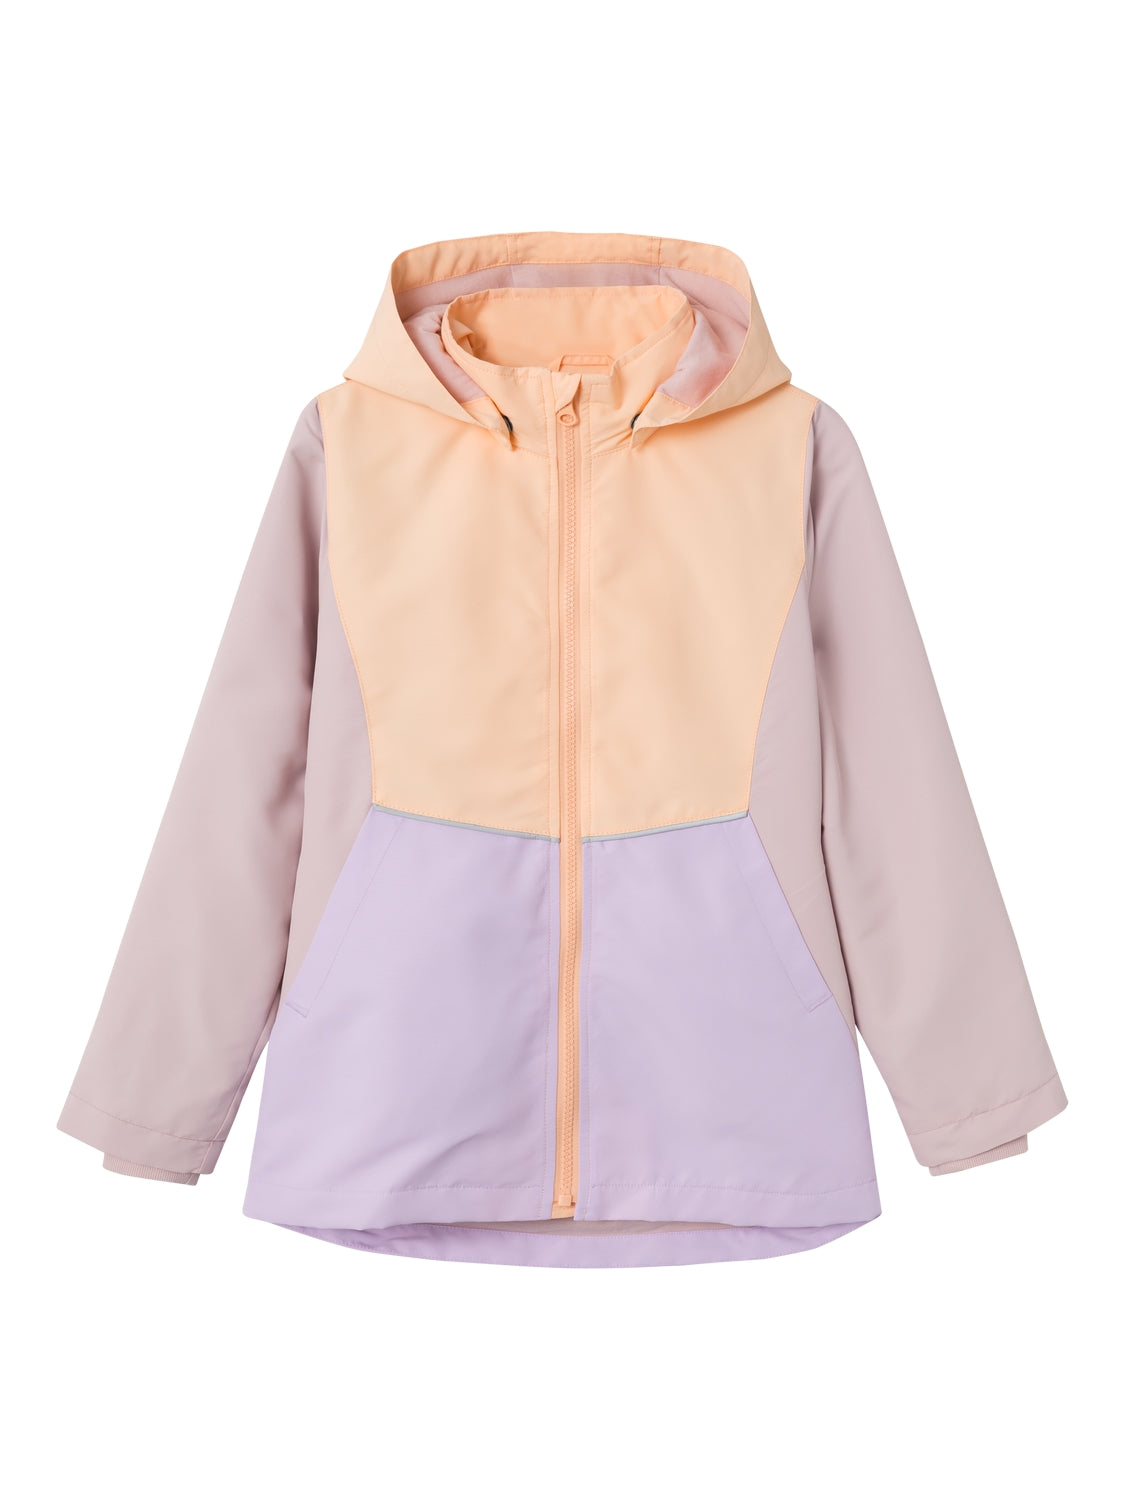 Girl's Maxi Jacket Blocks-Burnished Lilac-Front View